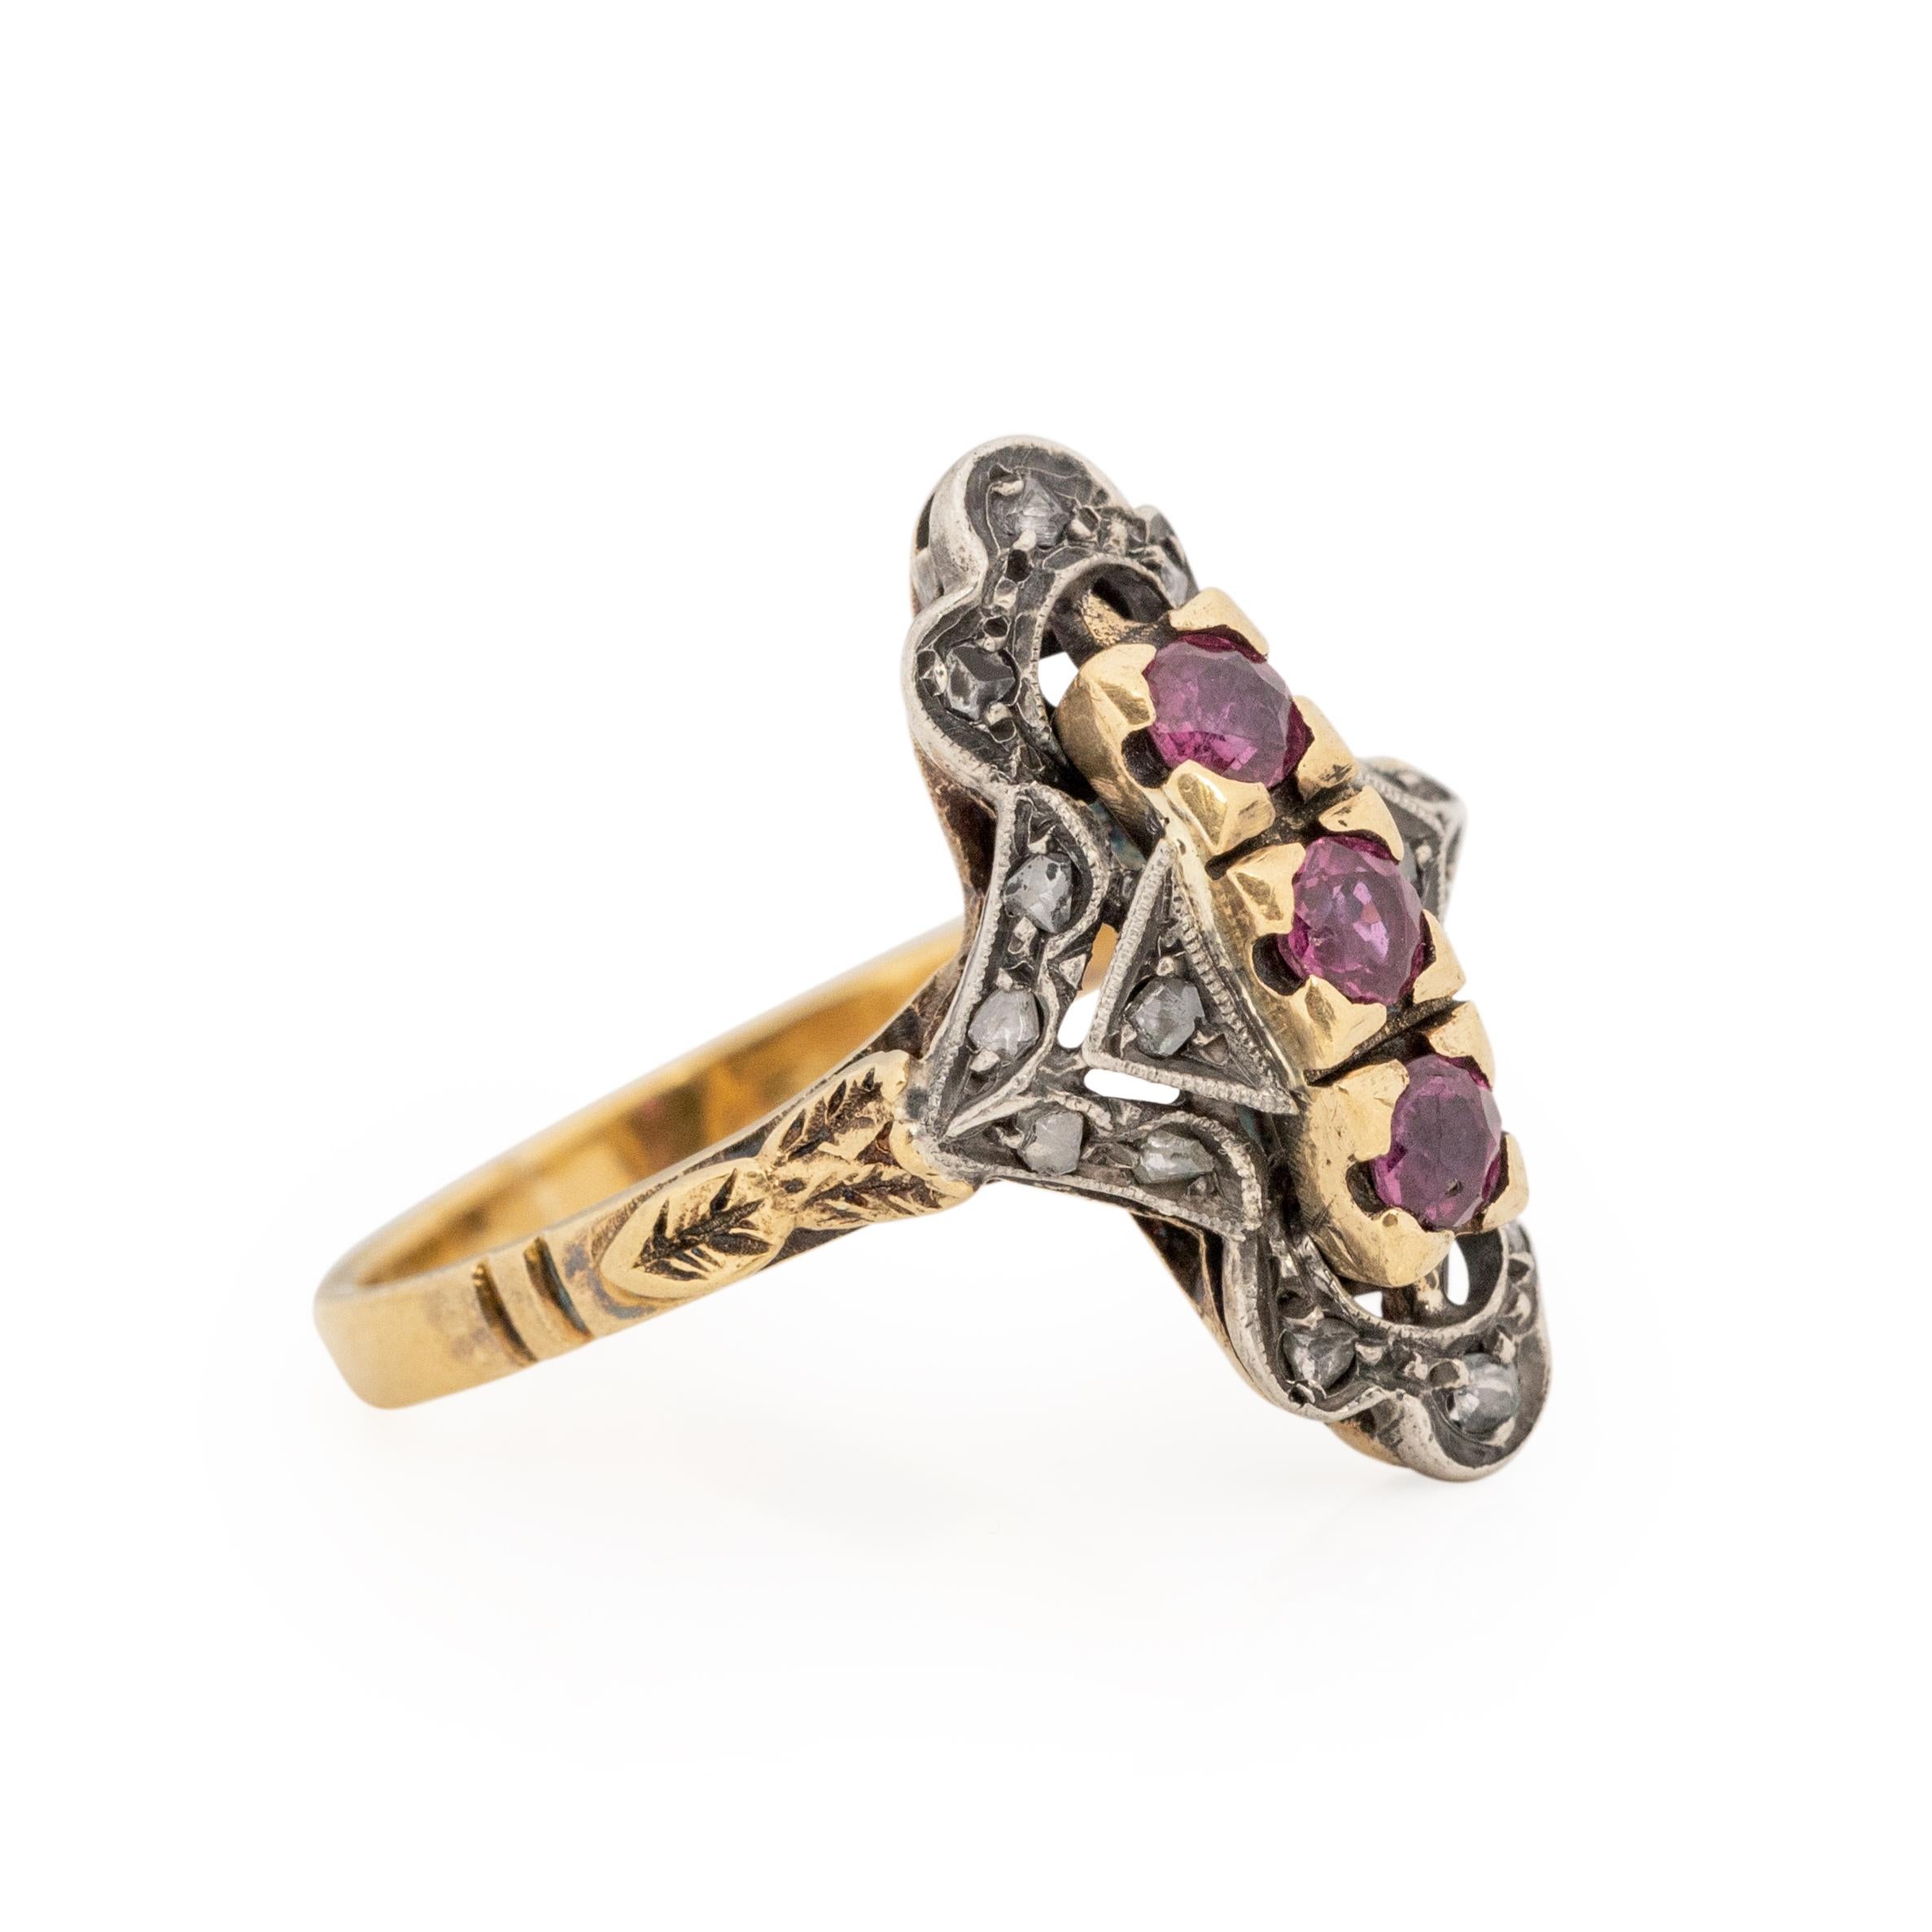 Here we have a classic Victorian beauty, this three stone ruby ring is a beautiful work of art in great condition for its age. With a two tone look this ring is crafted in 18K white and yellow gold. Starting at the yellow gold shanks that have